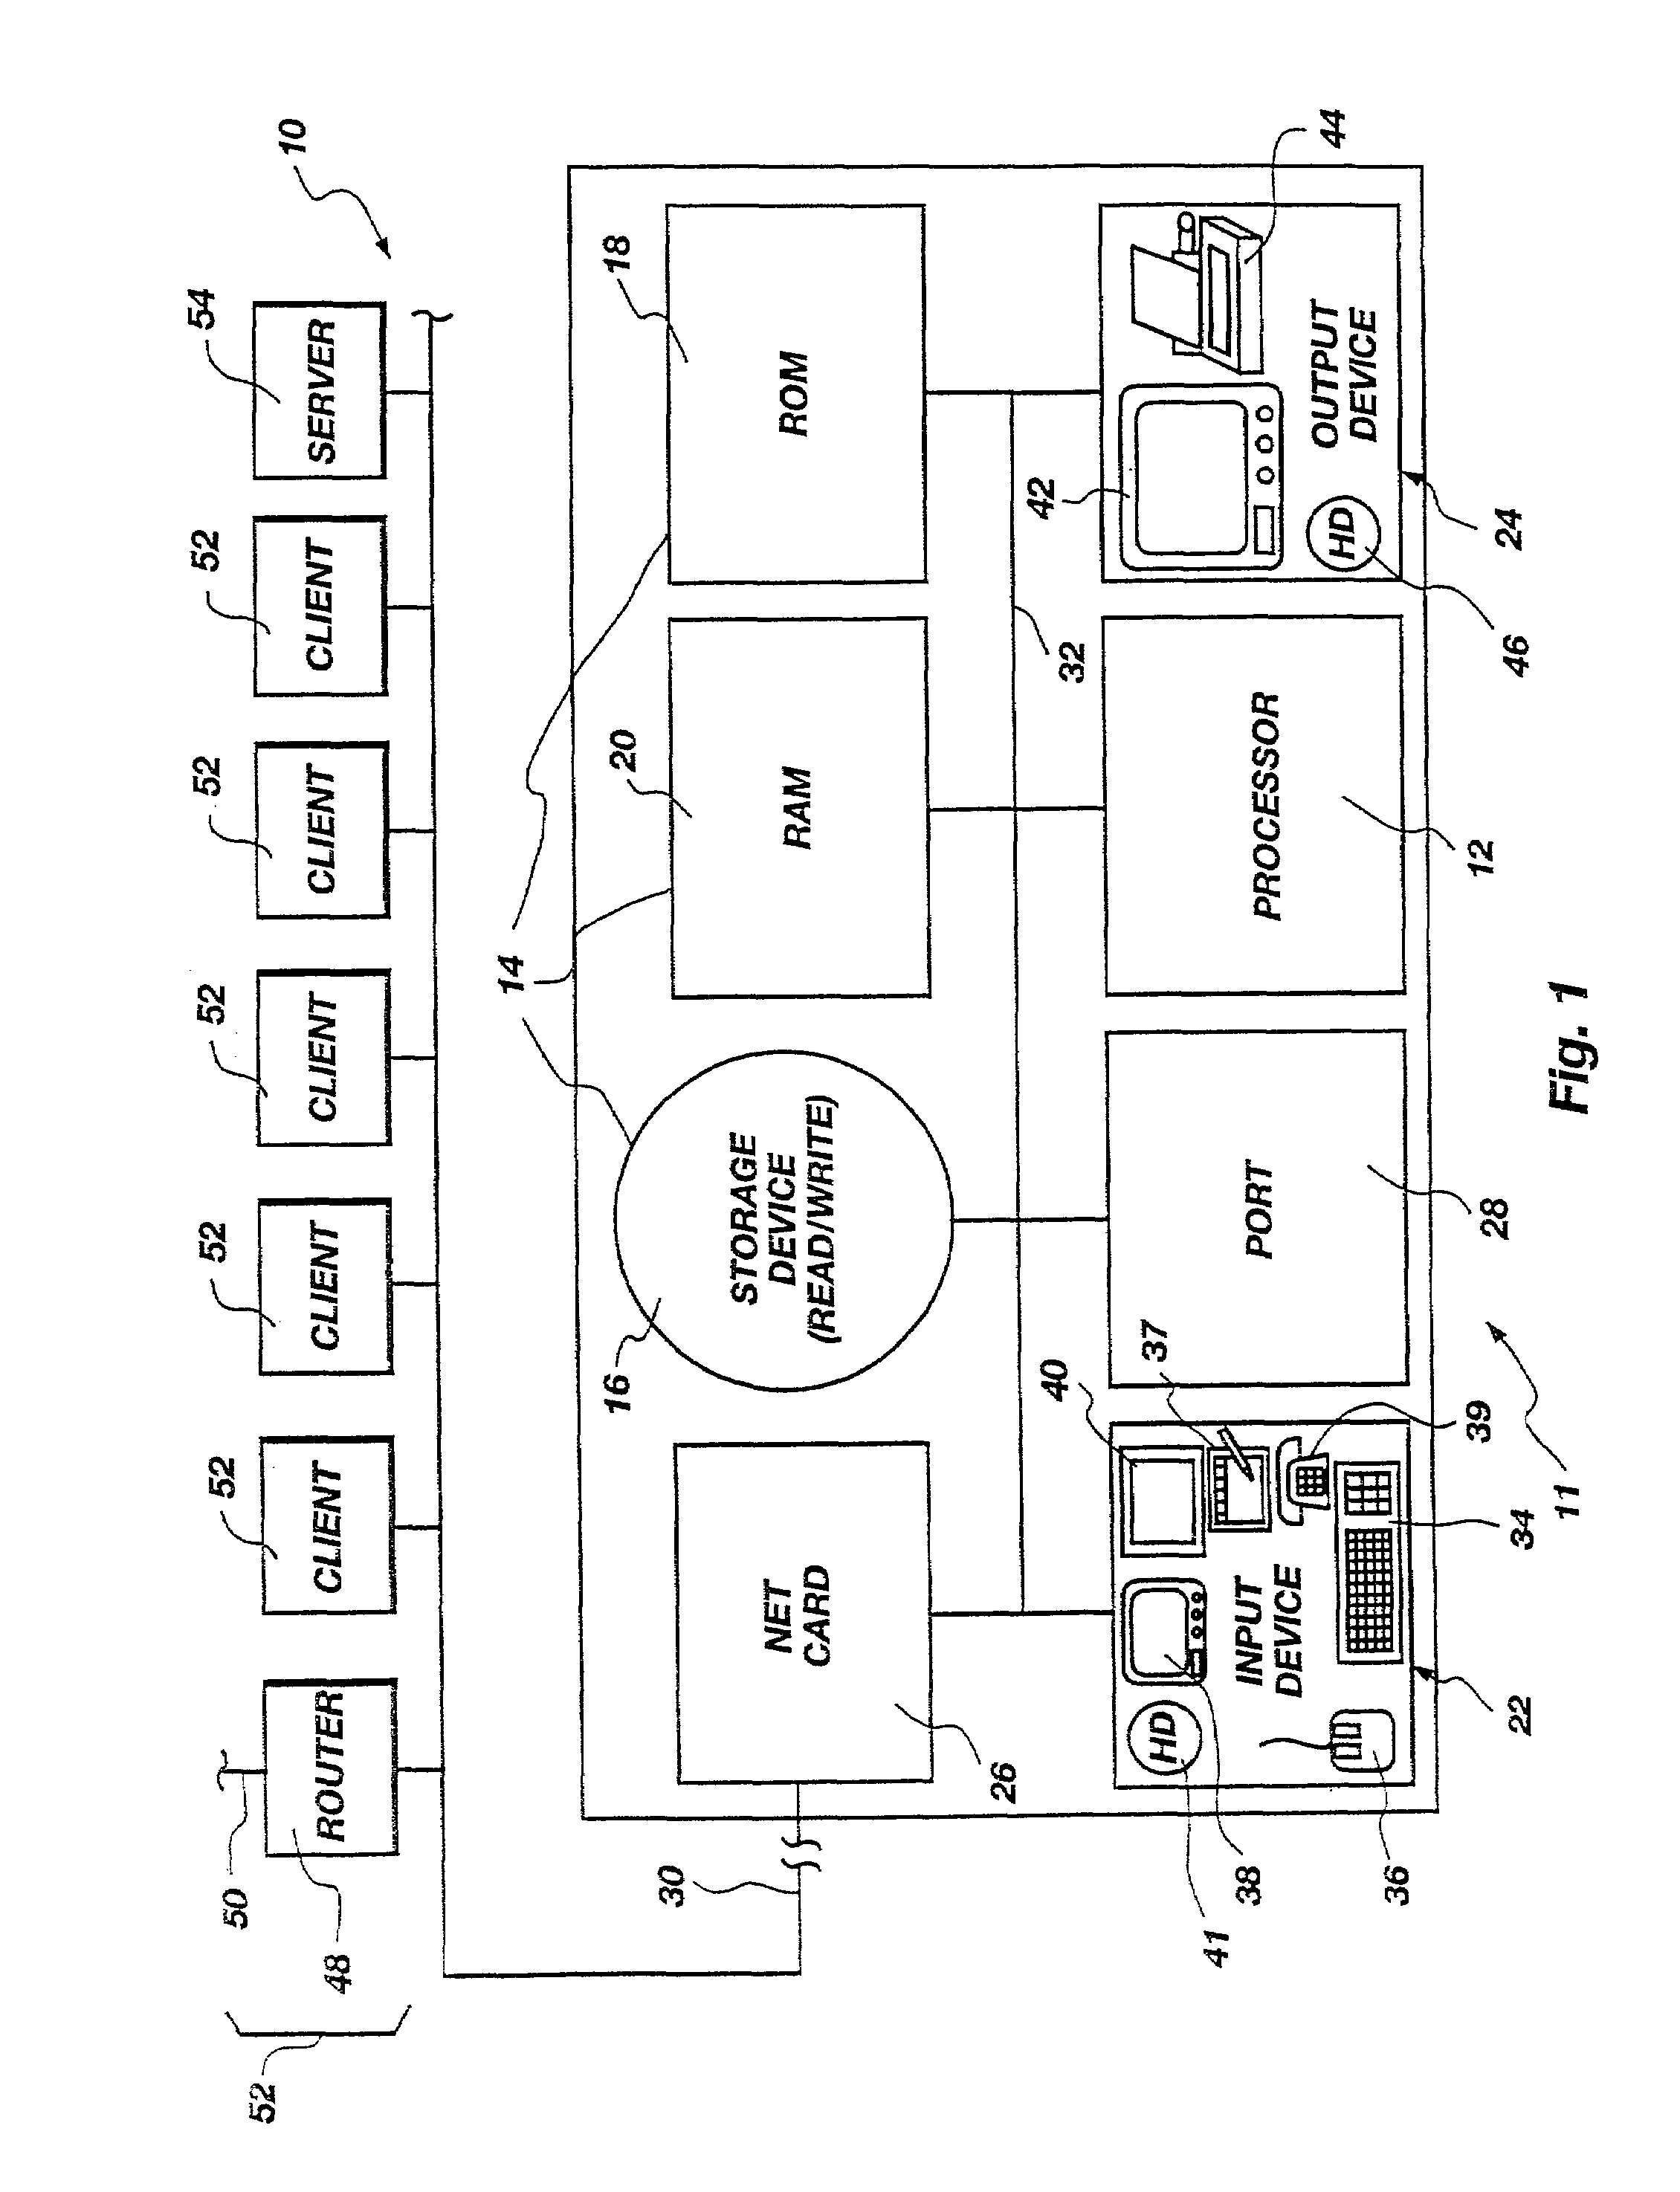 Heating, ventilating, and air-conditioning design apparatus and method